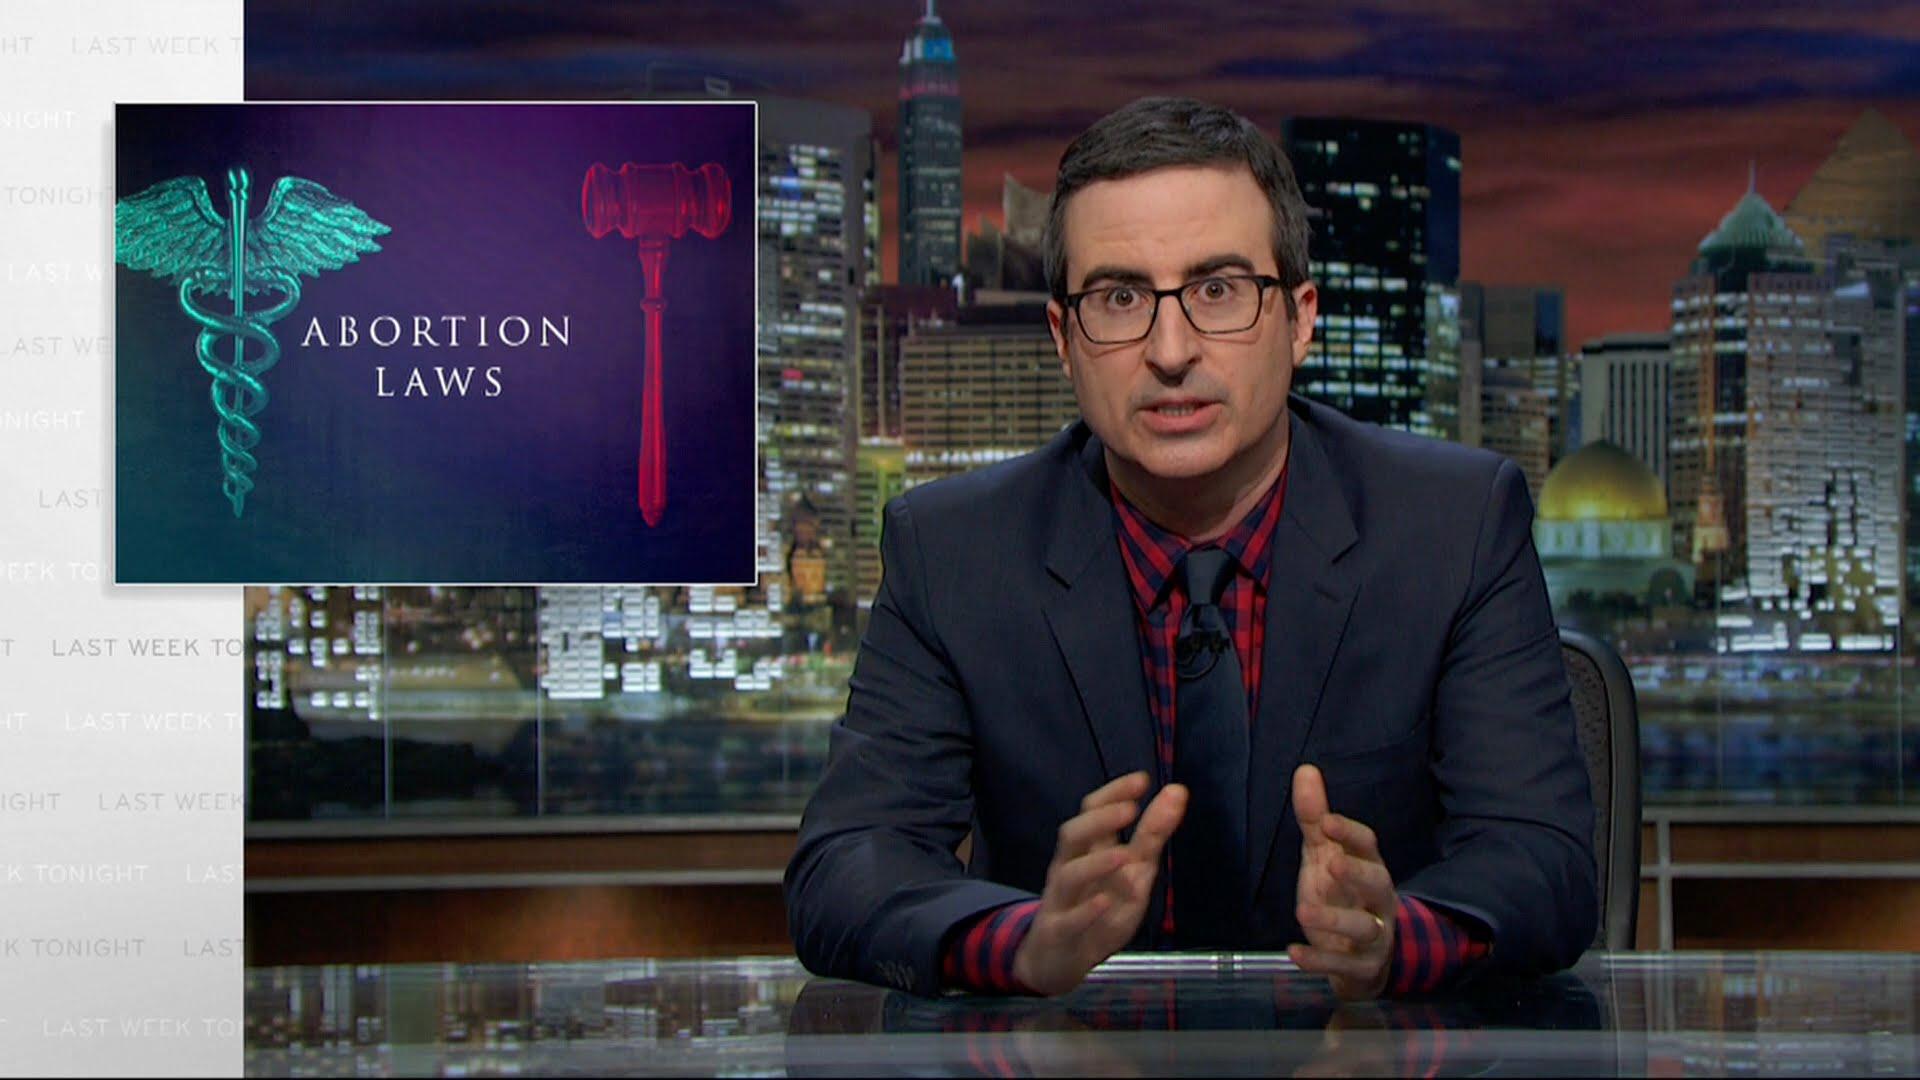 Abortion Laws: Last Week Tonight with John Oliver (HBO)